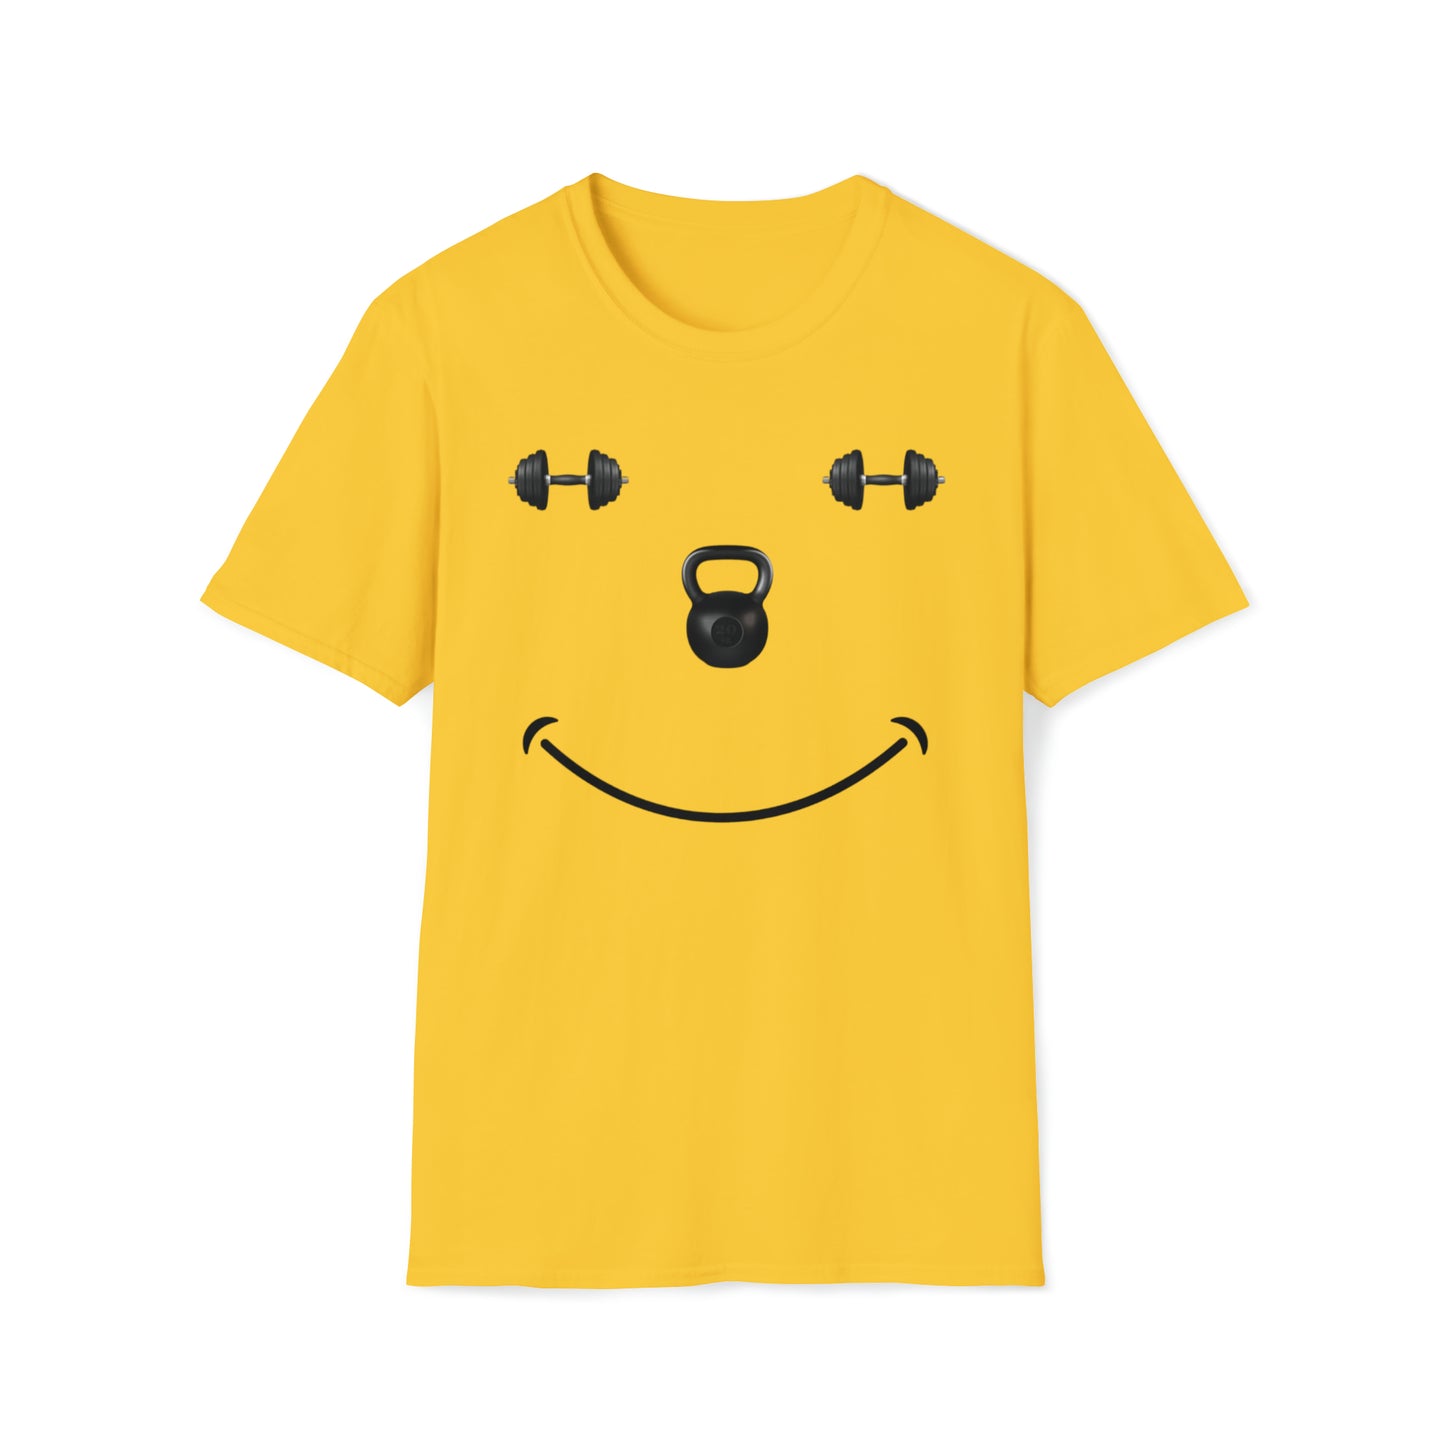 The Gym Makes Me Happy Unisex Softstyle T-Shirt